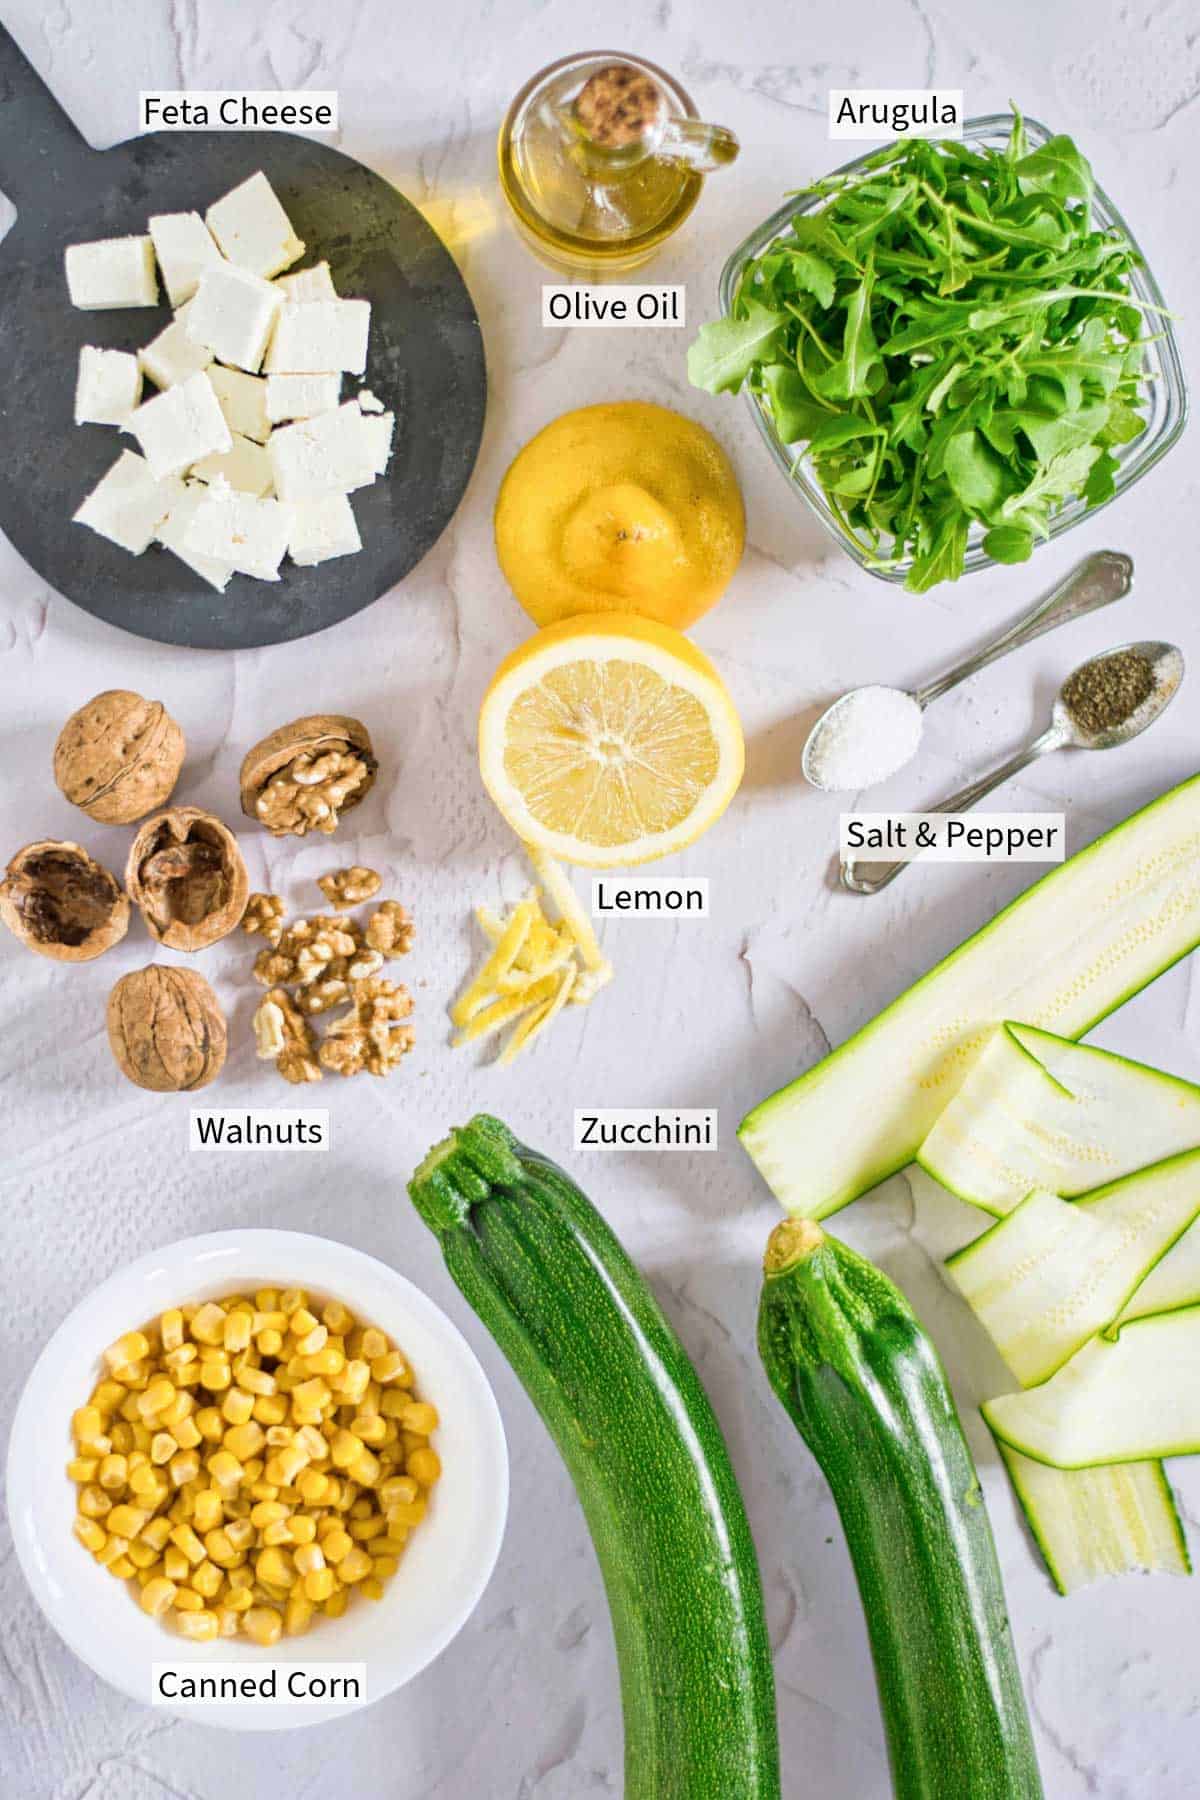 Ingredients for a zucchini and arugula salad with feta cheese, walnuts, canned corn, and a lemon olive oil dressing.